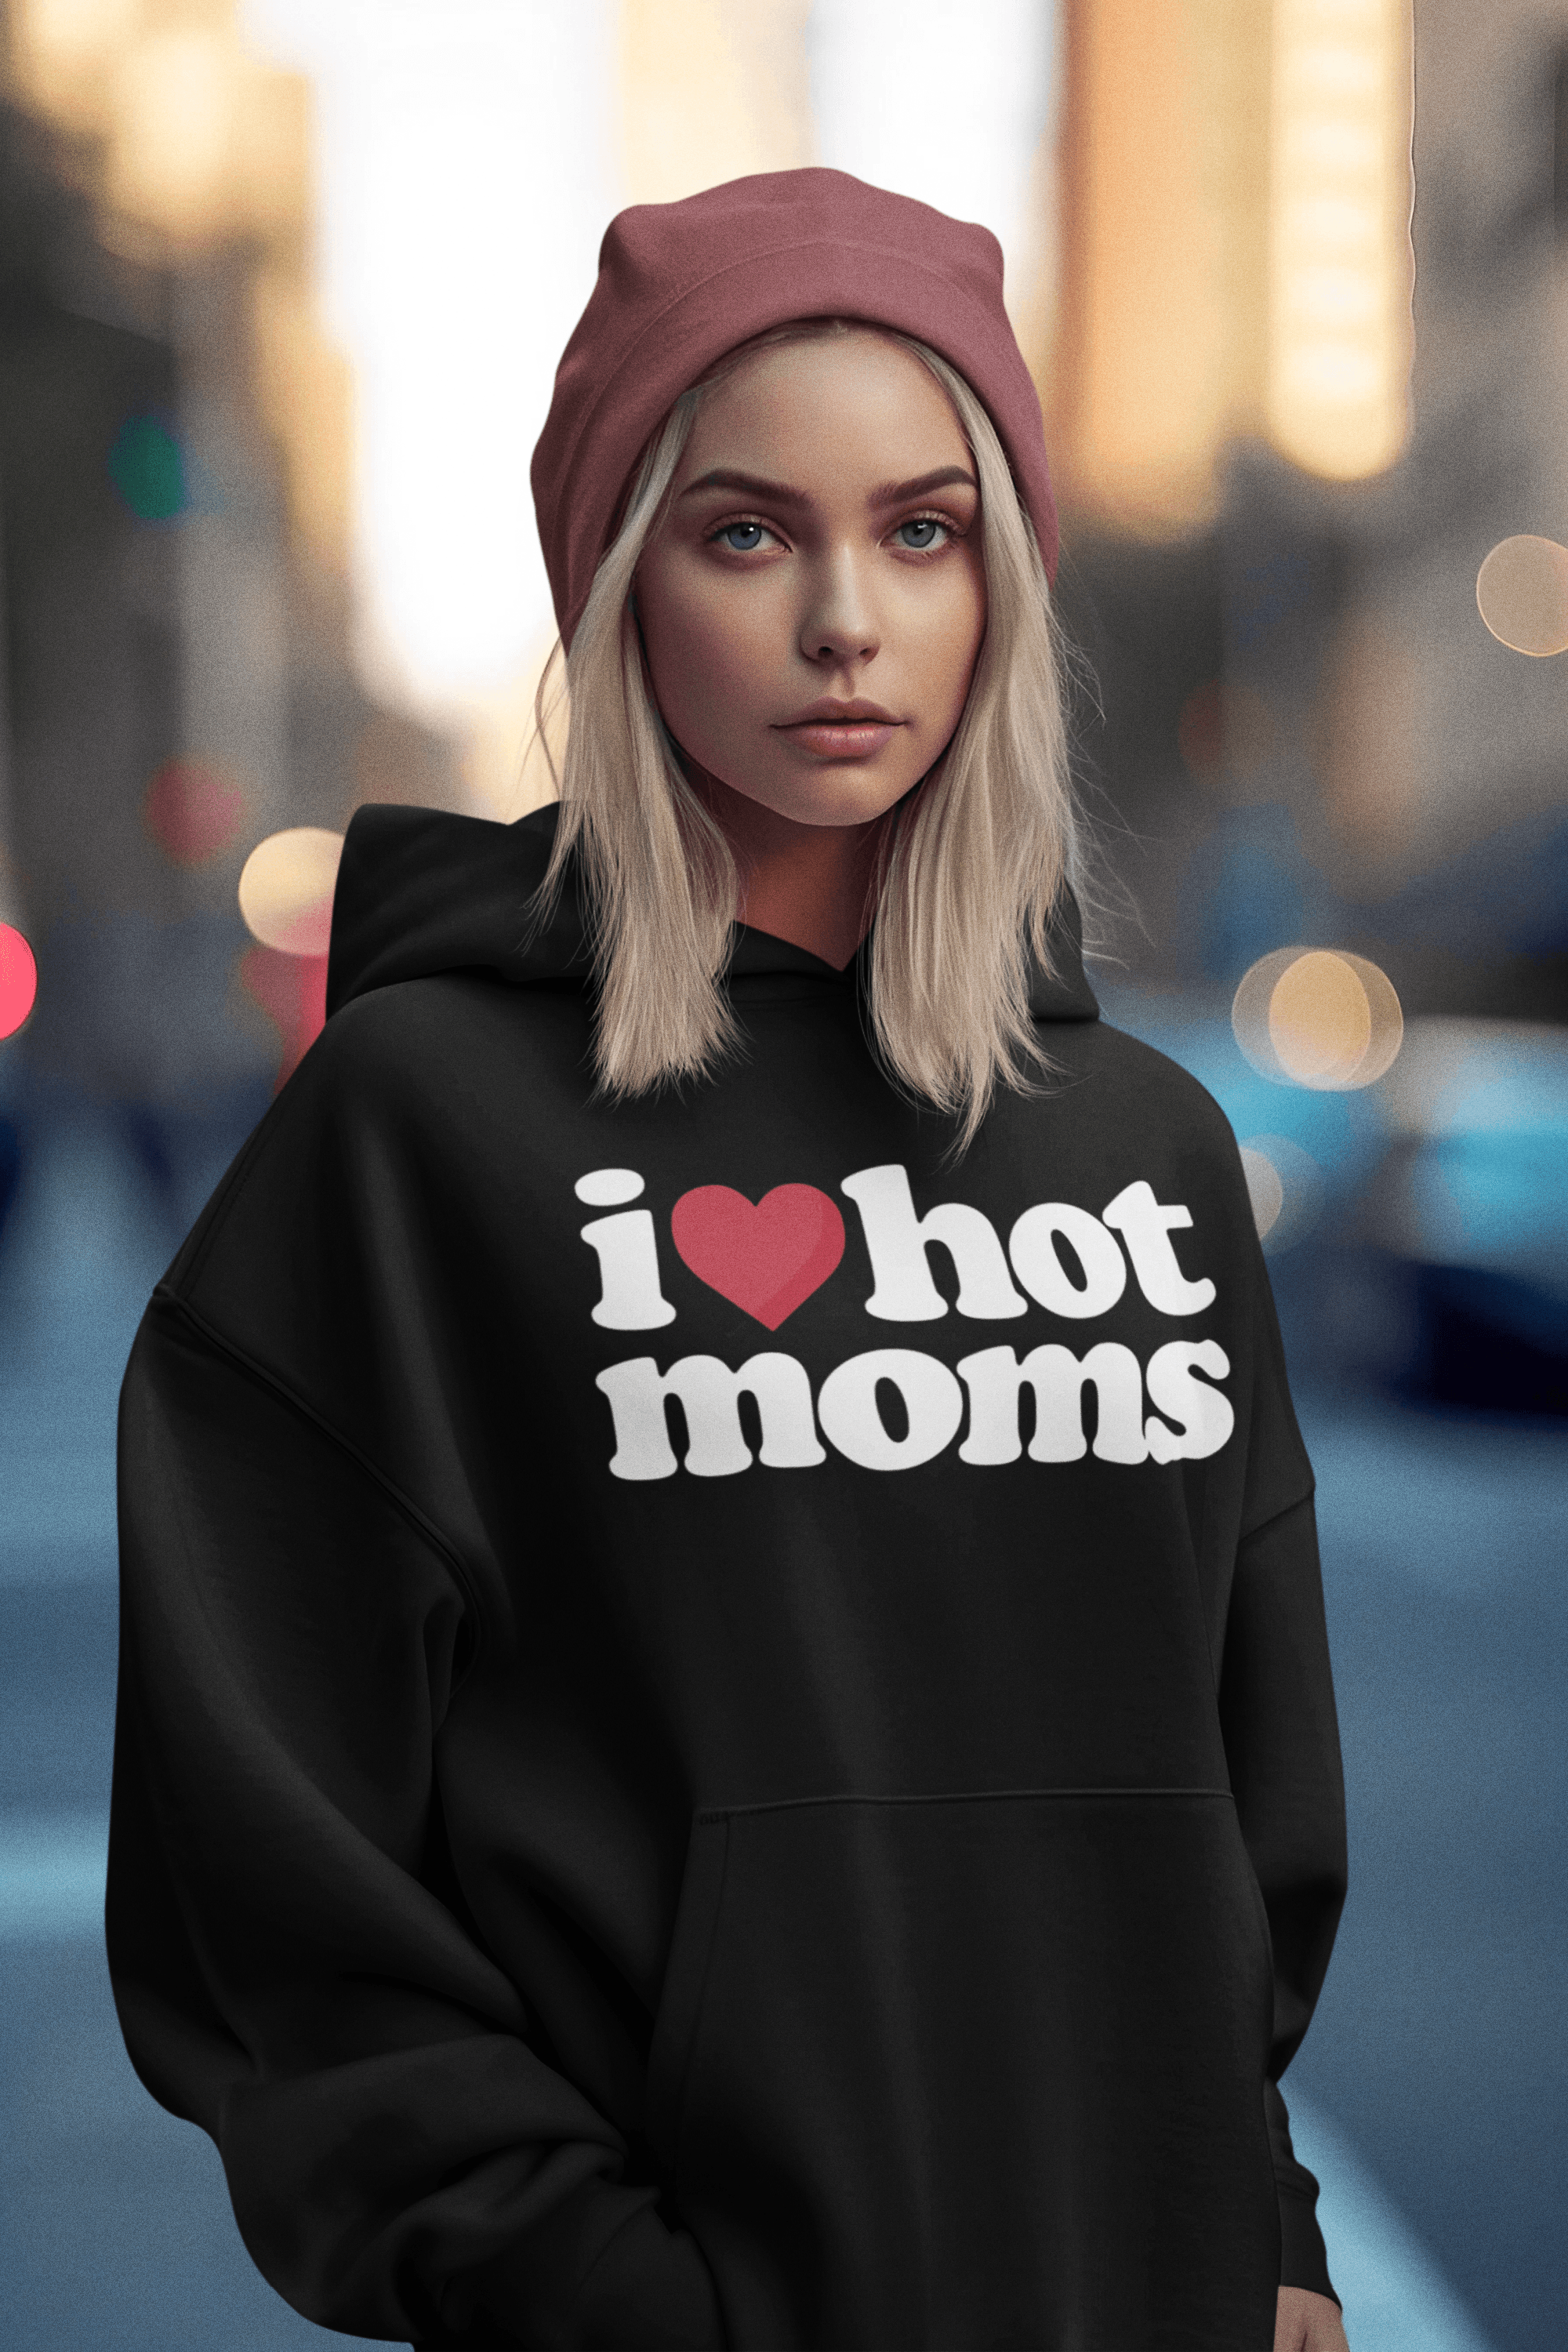 Midweight Hoodie I Love Hot Mom's with Heart Shaped Love Unisex Pullover - TopKoalaTee